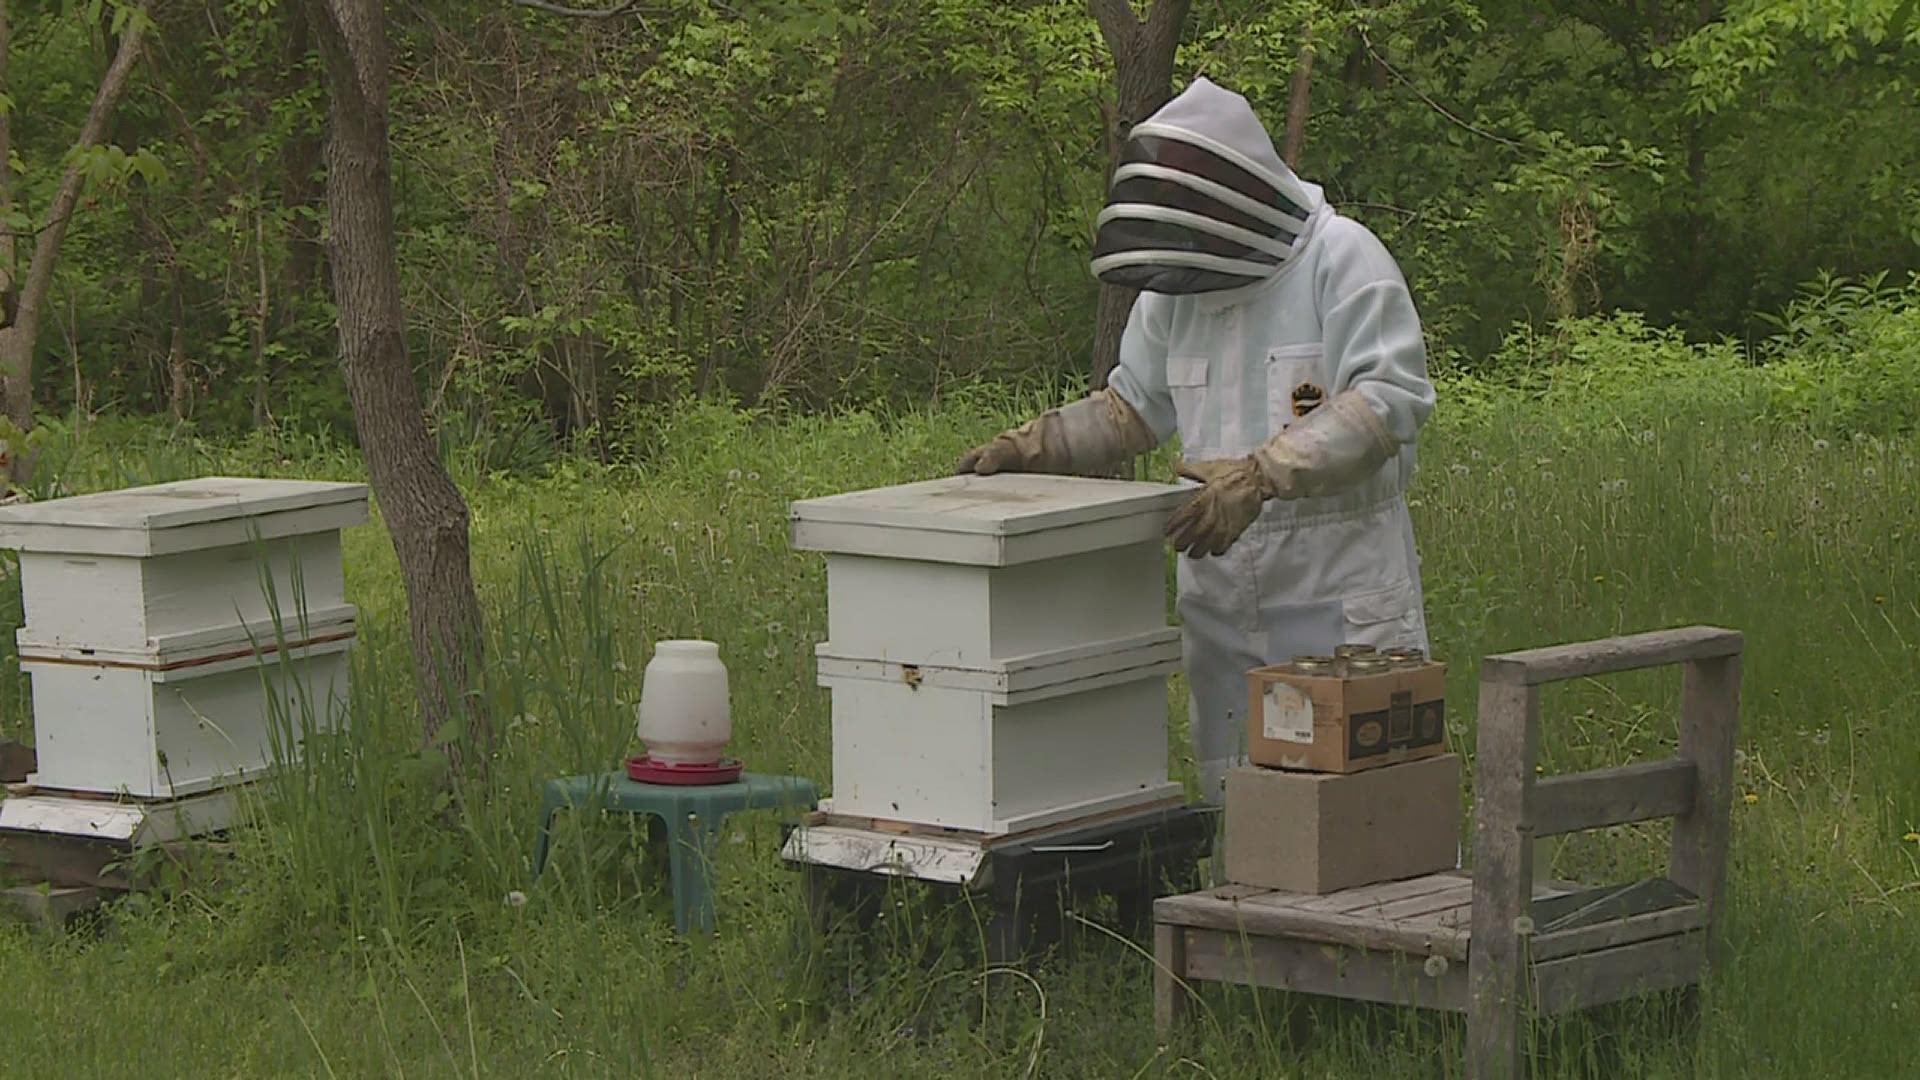 The honey business uses local bees from the owners very own back yard